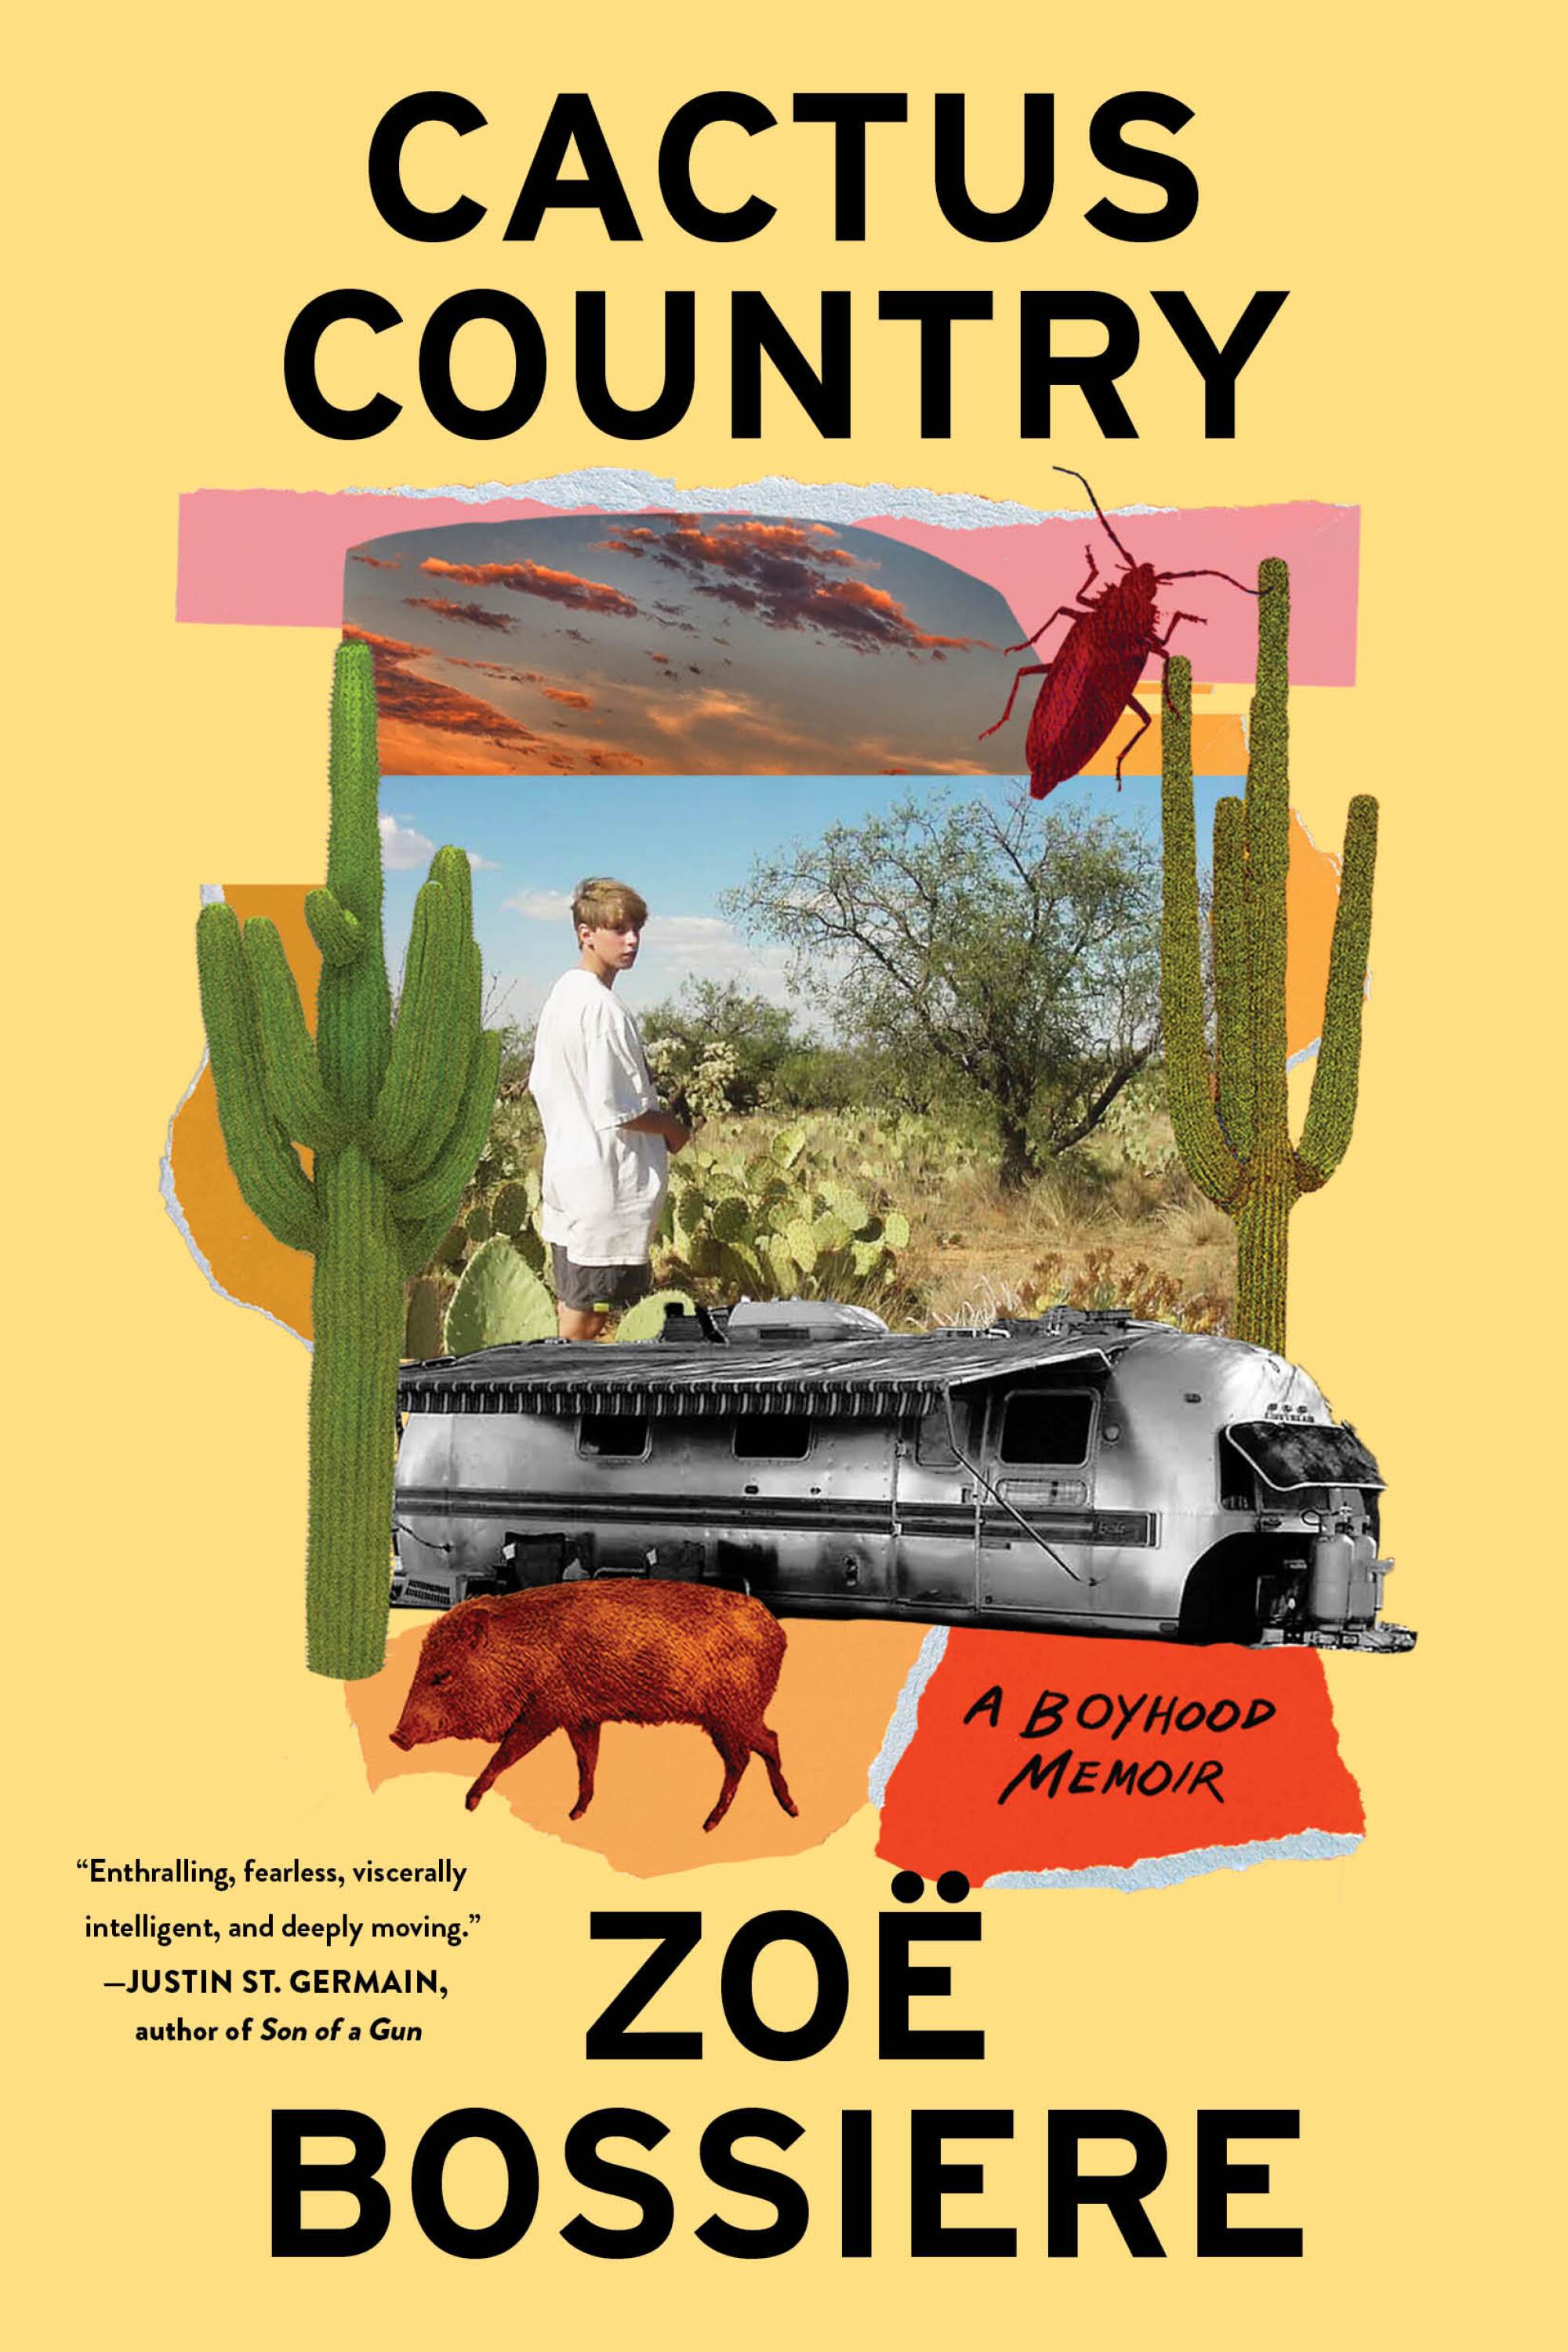 "Cactus Country" by Zoë Bossiere